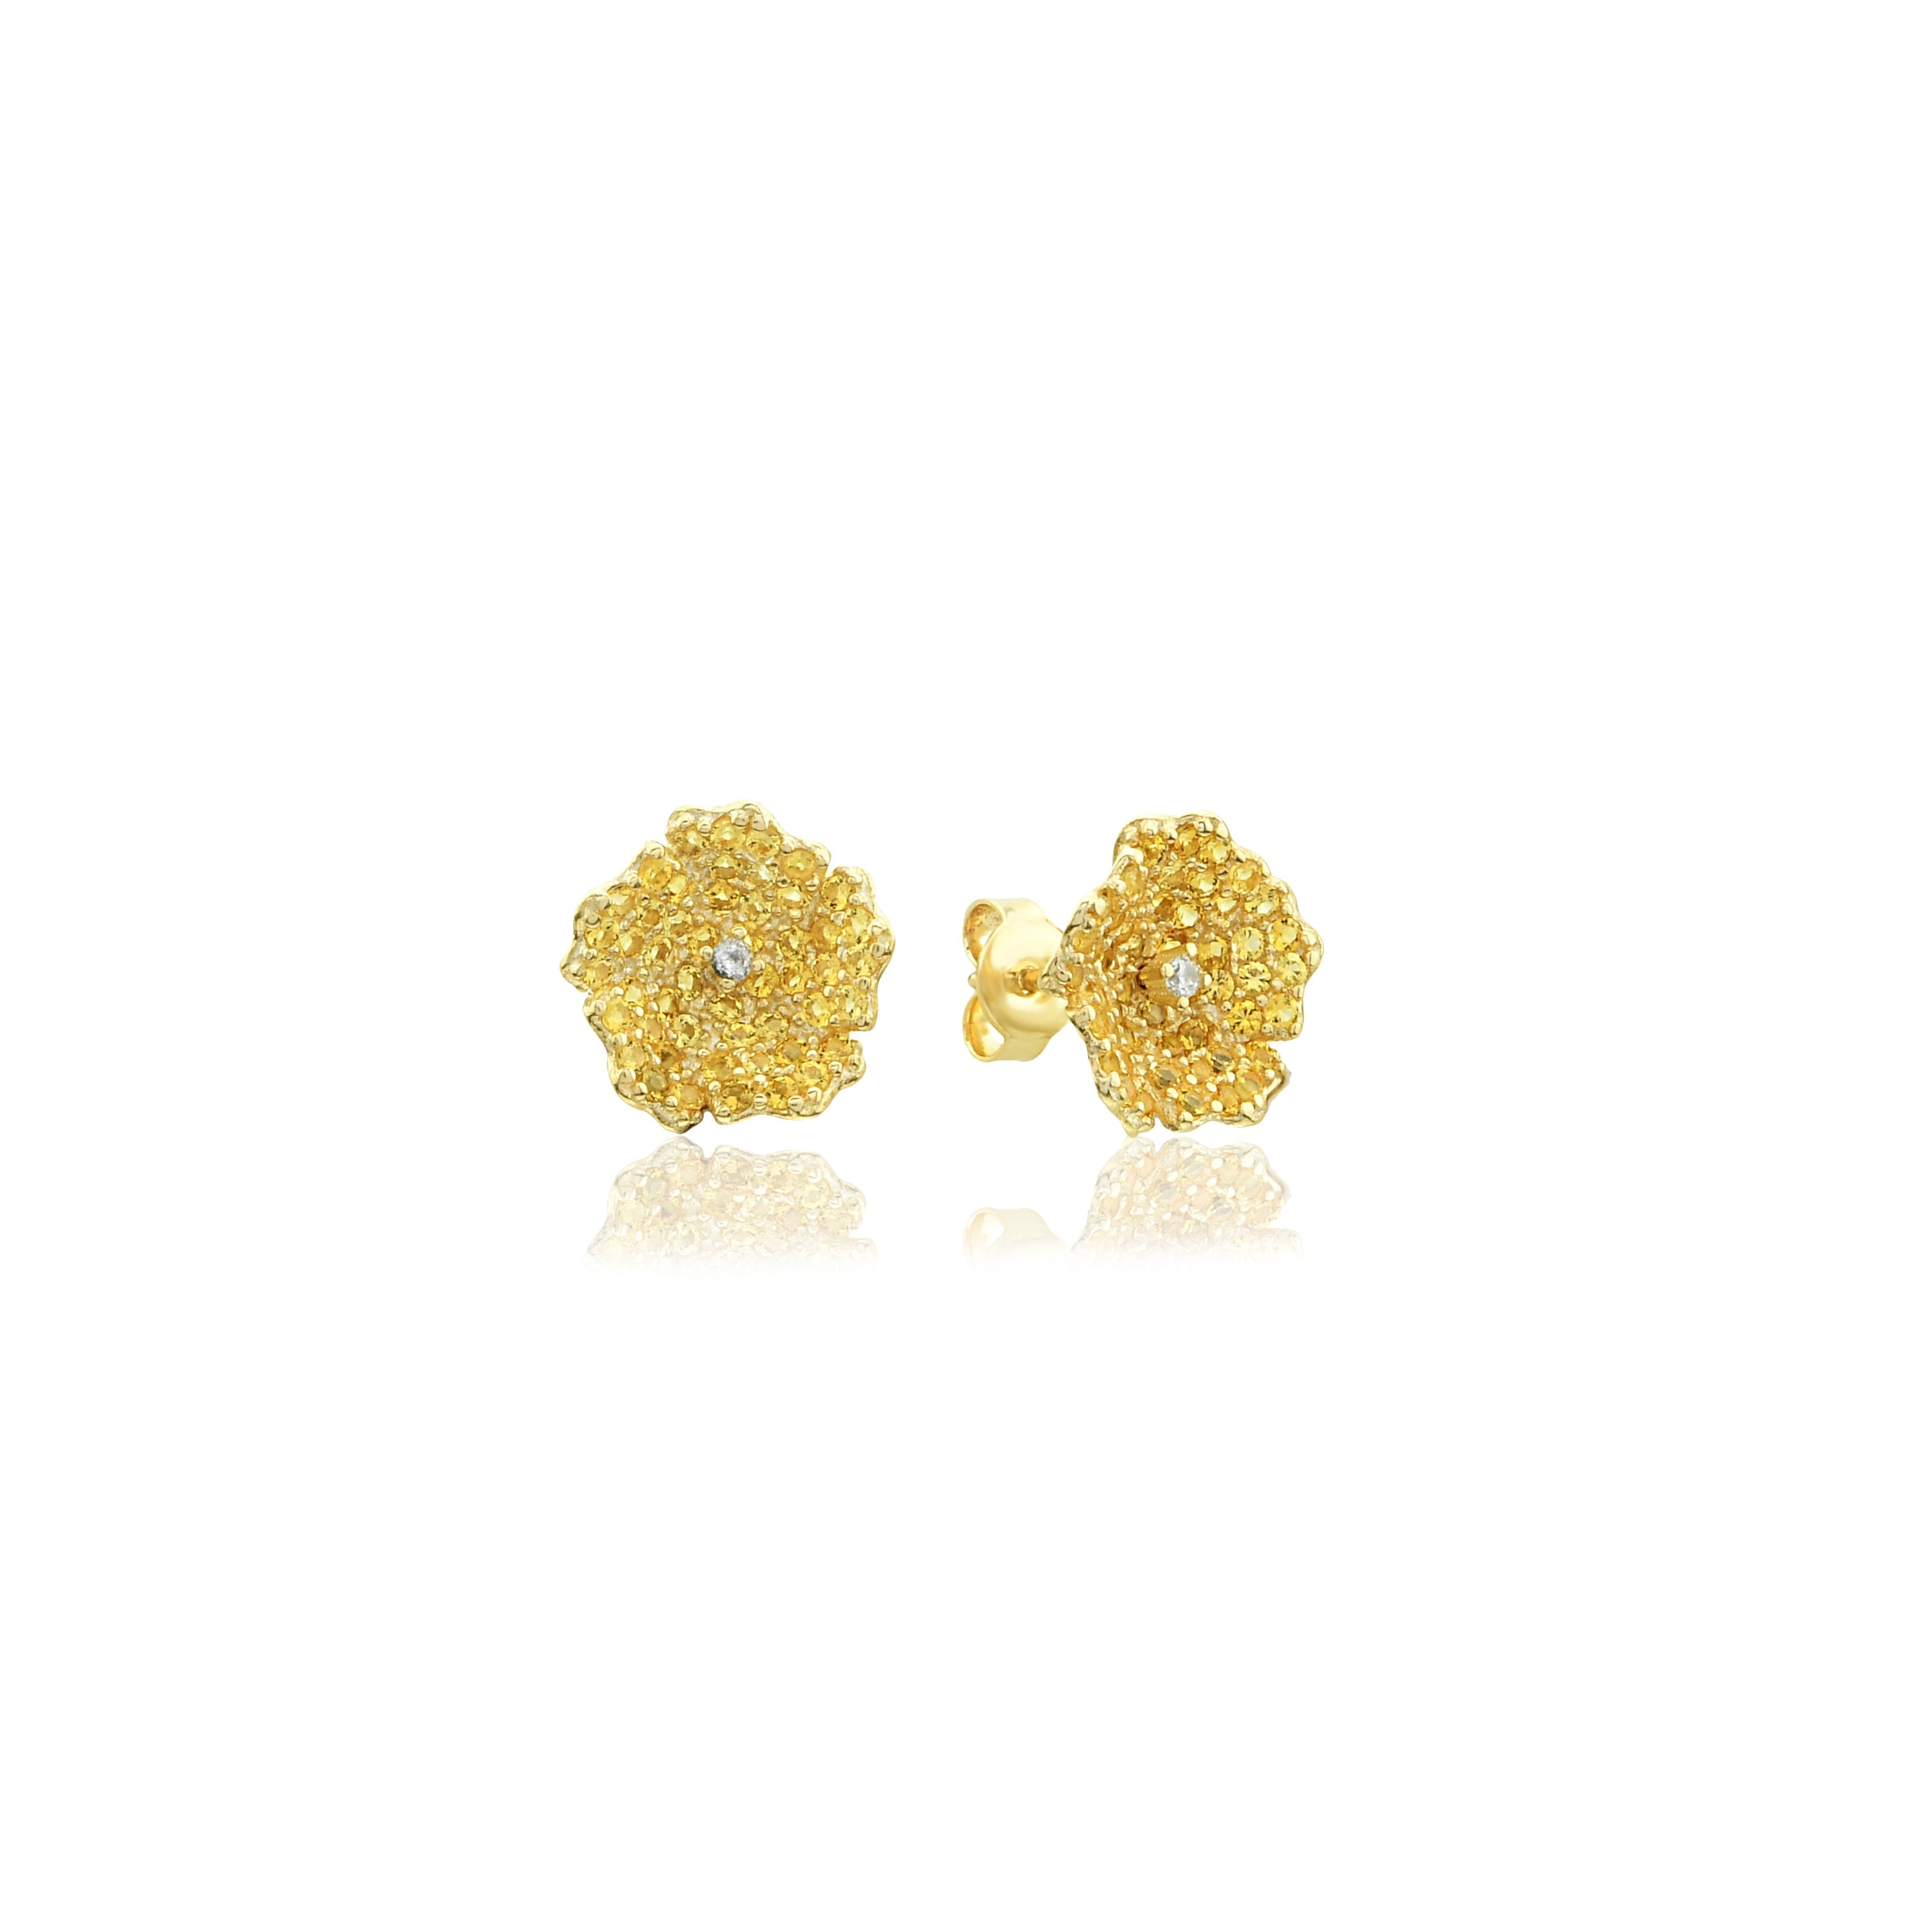 Yellow Floral Studs with Zircon - Botanical Earrings